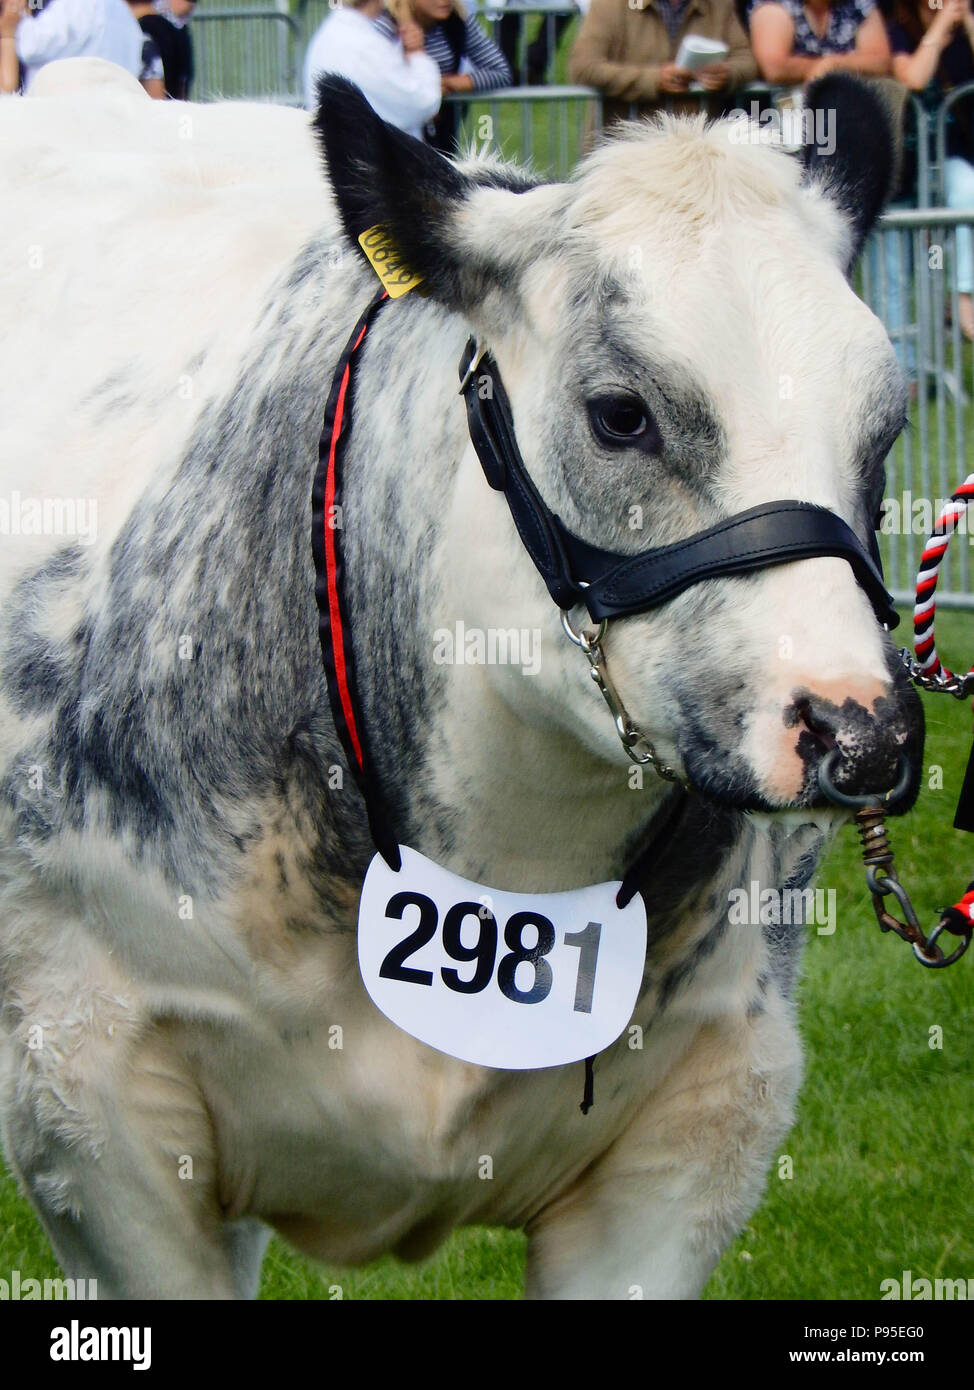 Close up of a bull in the judging ring on the showground at the Royal Welsh Show. The show is one of Europe's biggest agricultural events. Stock Photo